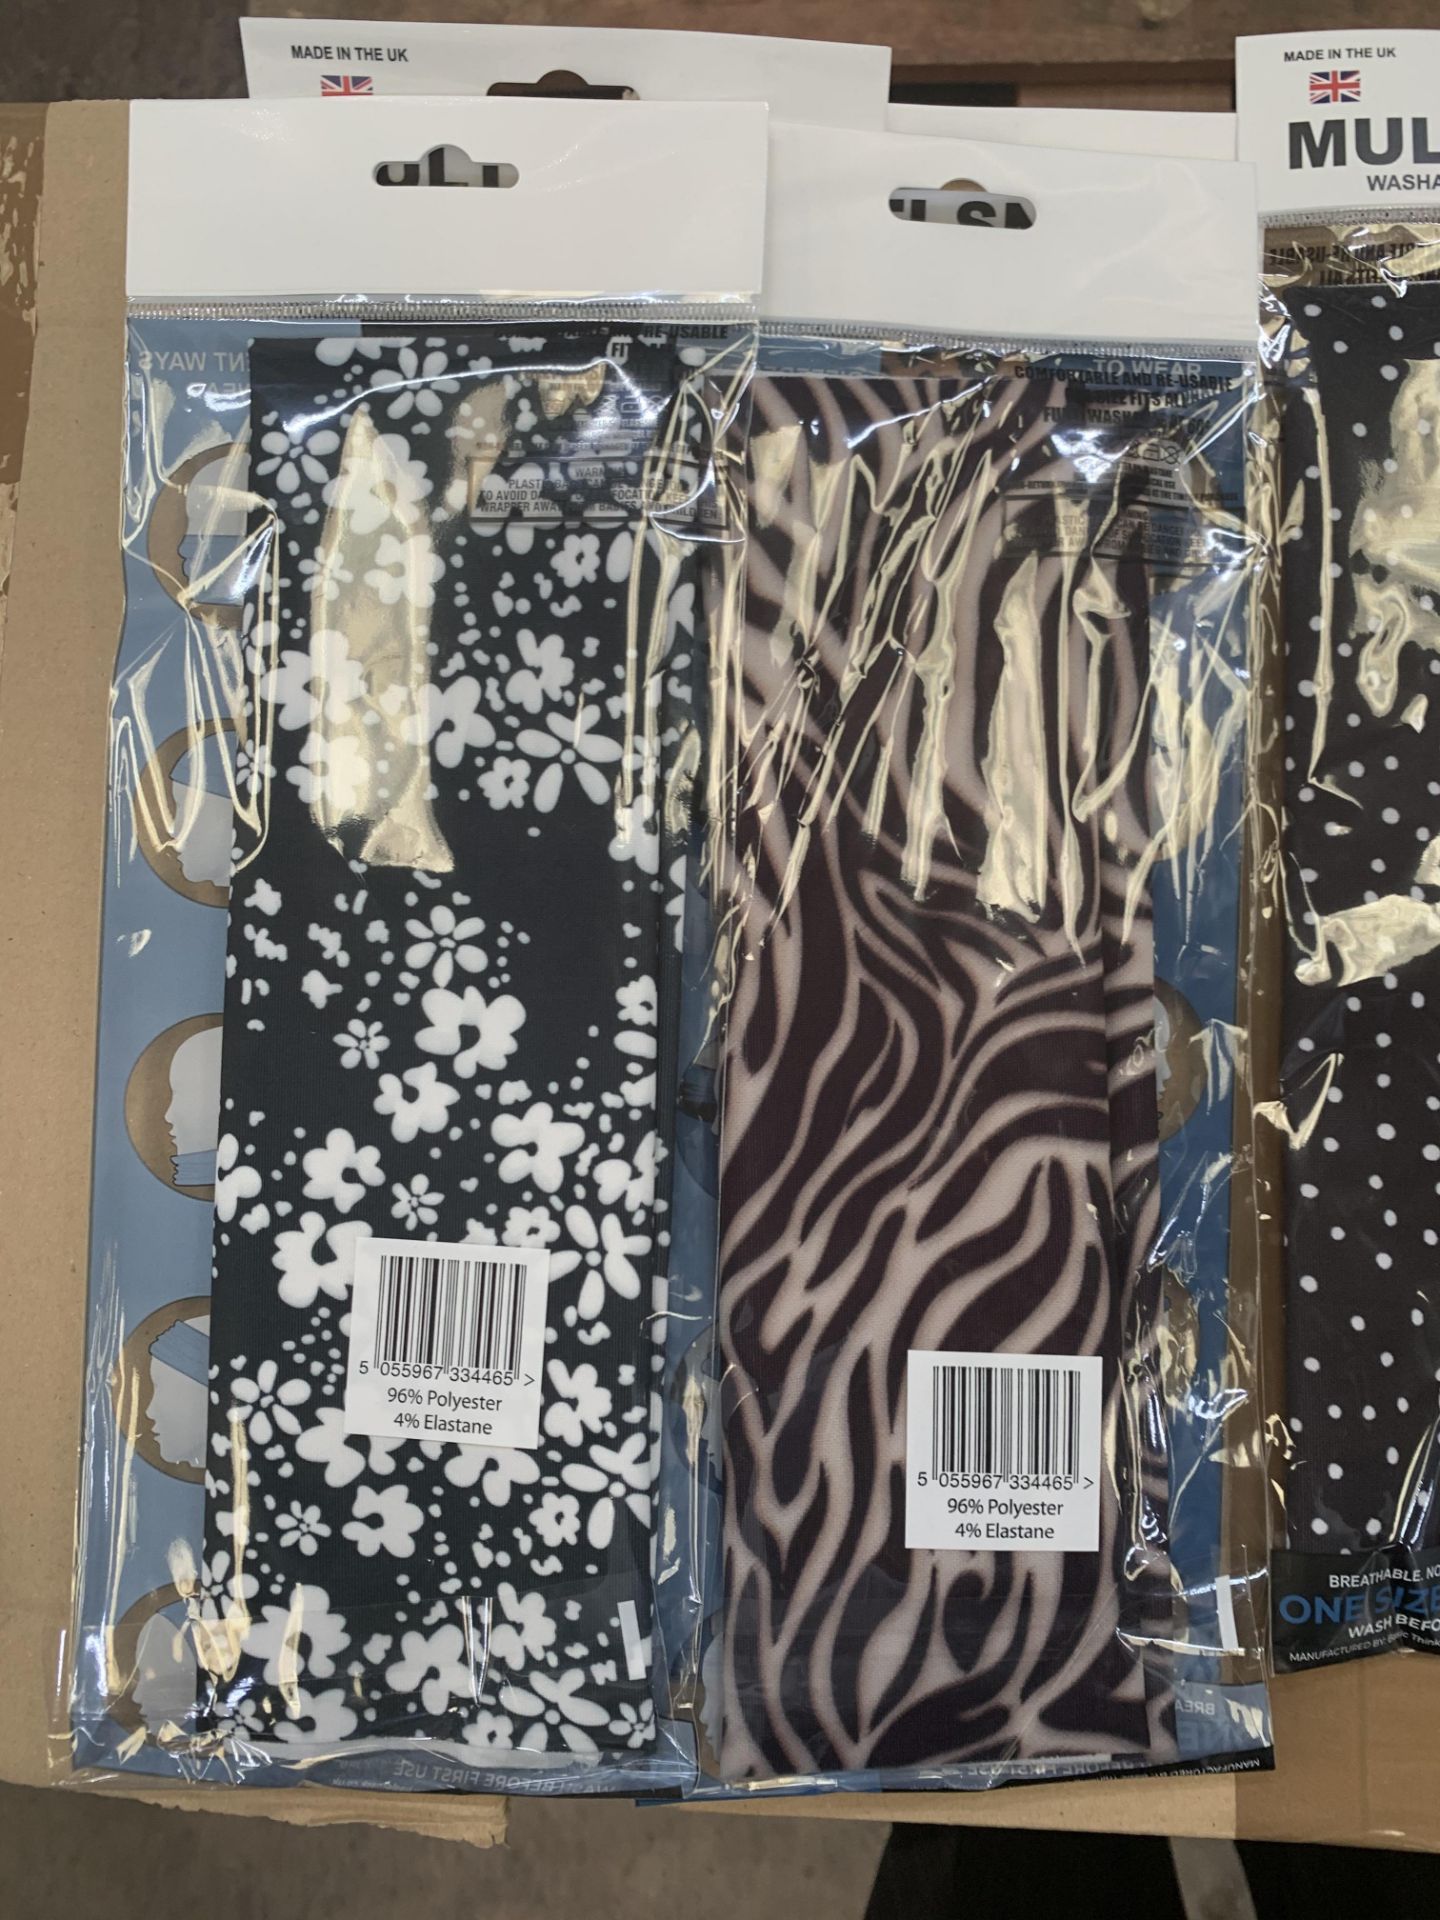 25 off multi snood face coverings, in 5 different designs - 5 each of 2 different animal prints, flo - Image 7 of 10